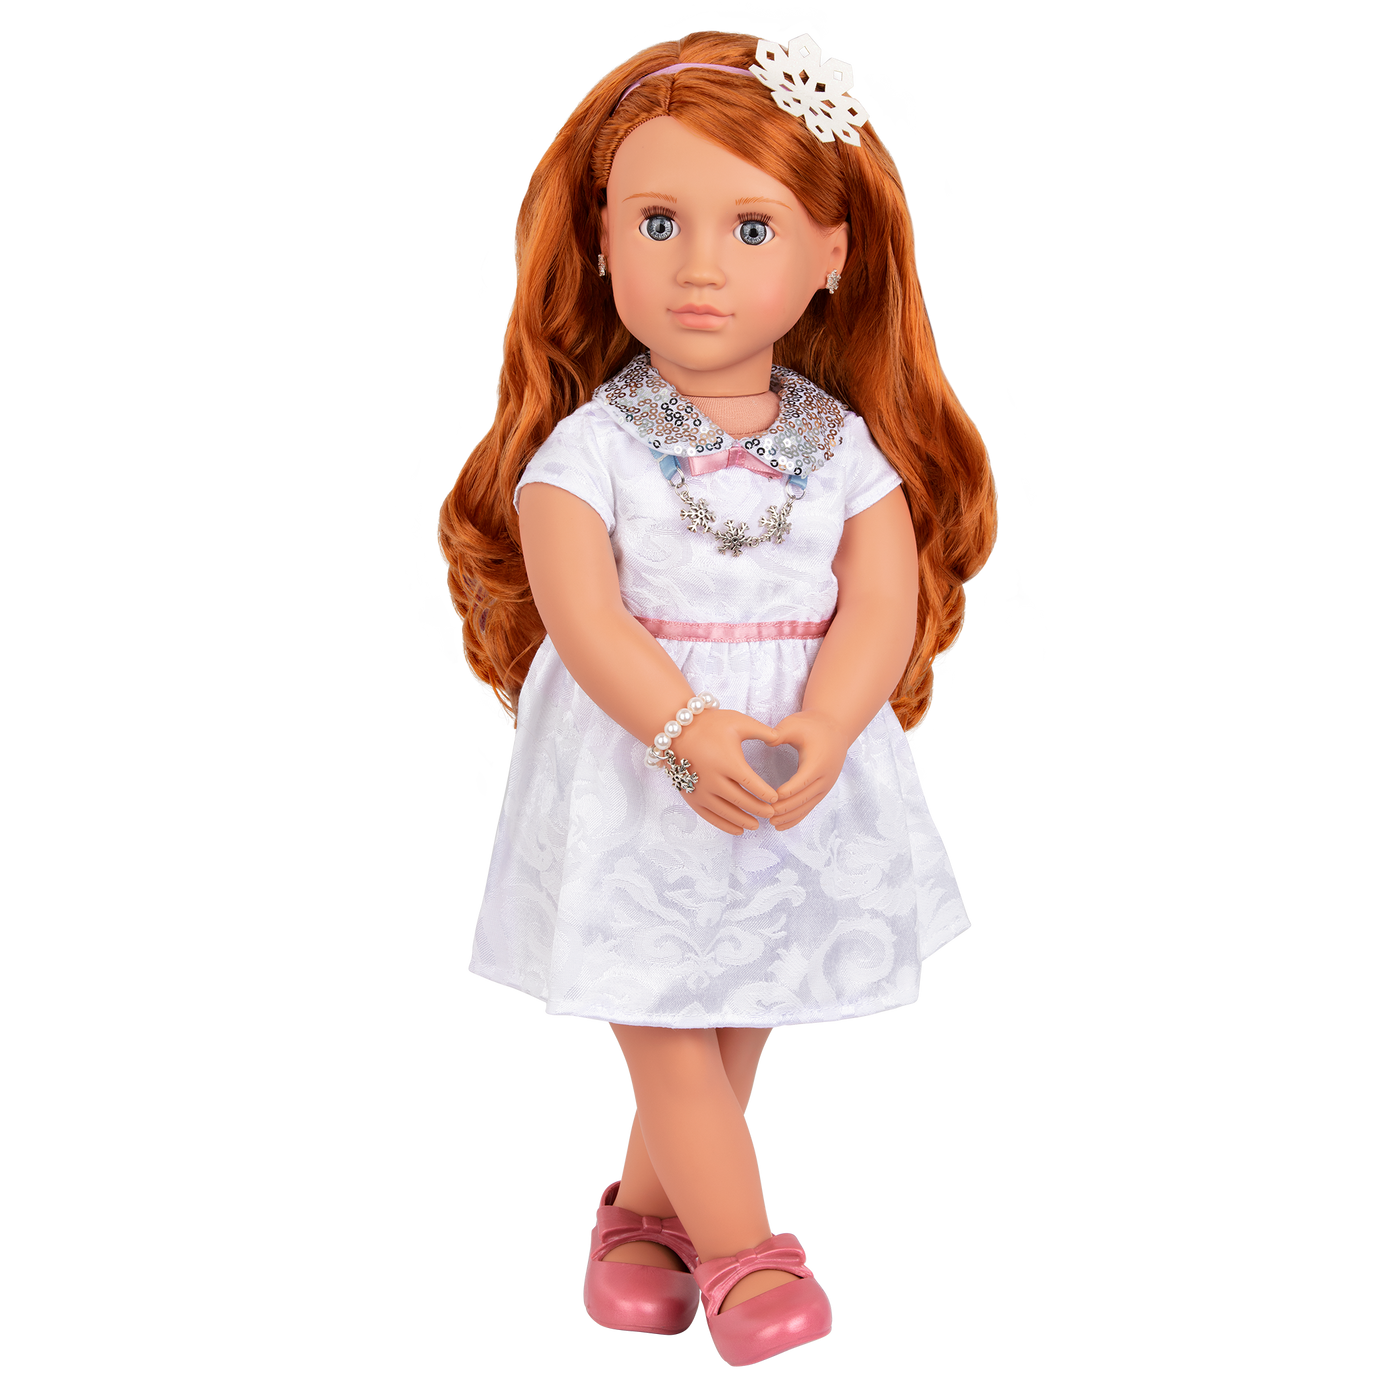 18-inch doll with red hair, blue eyes, jewelry and box